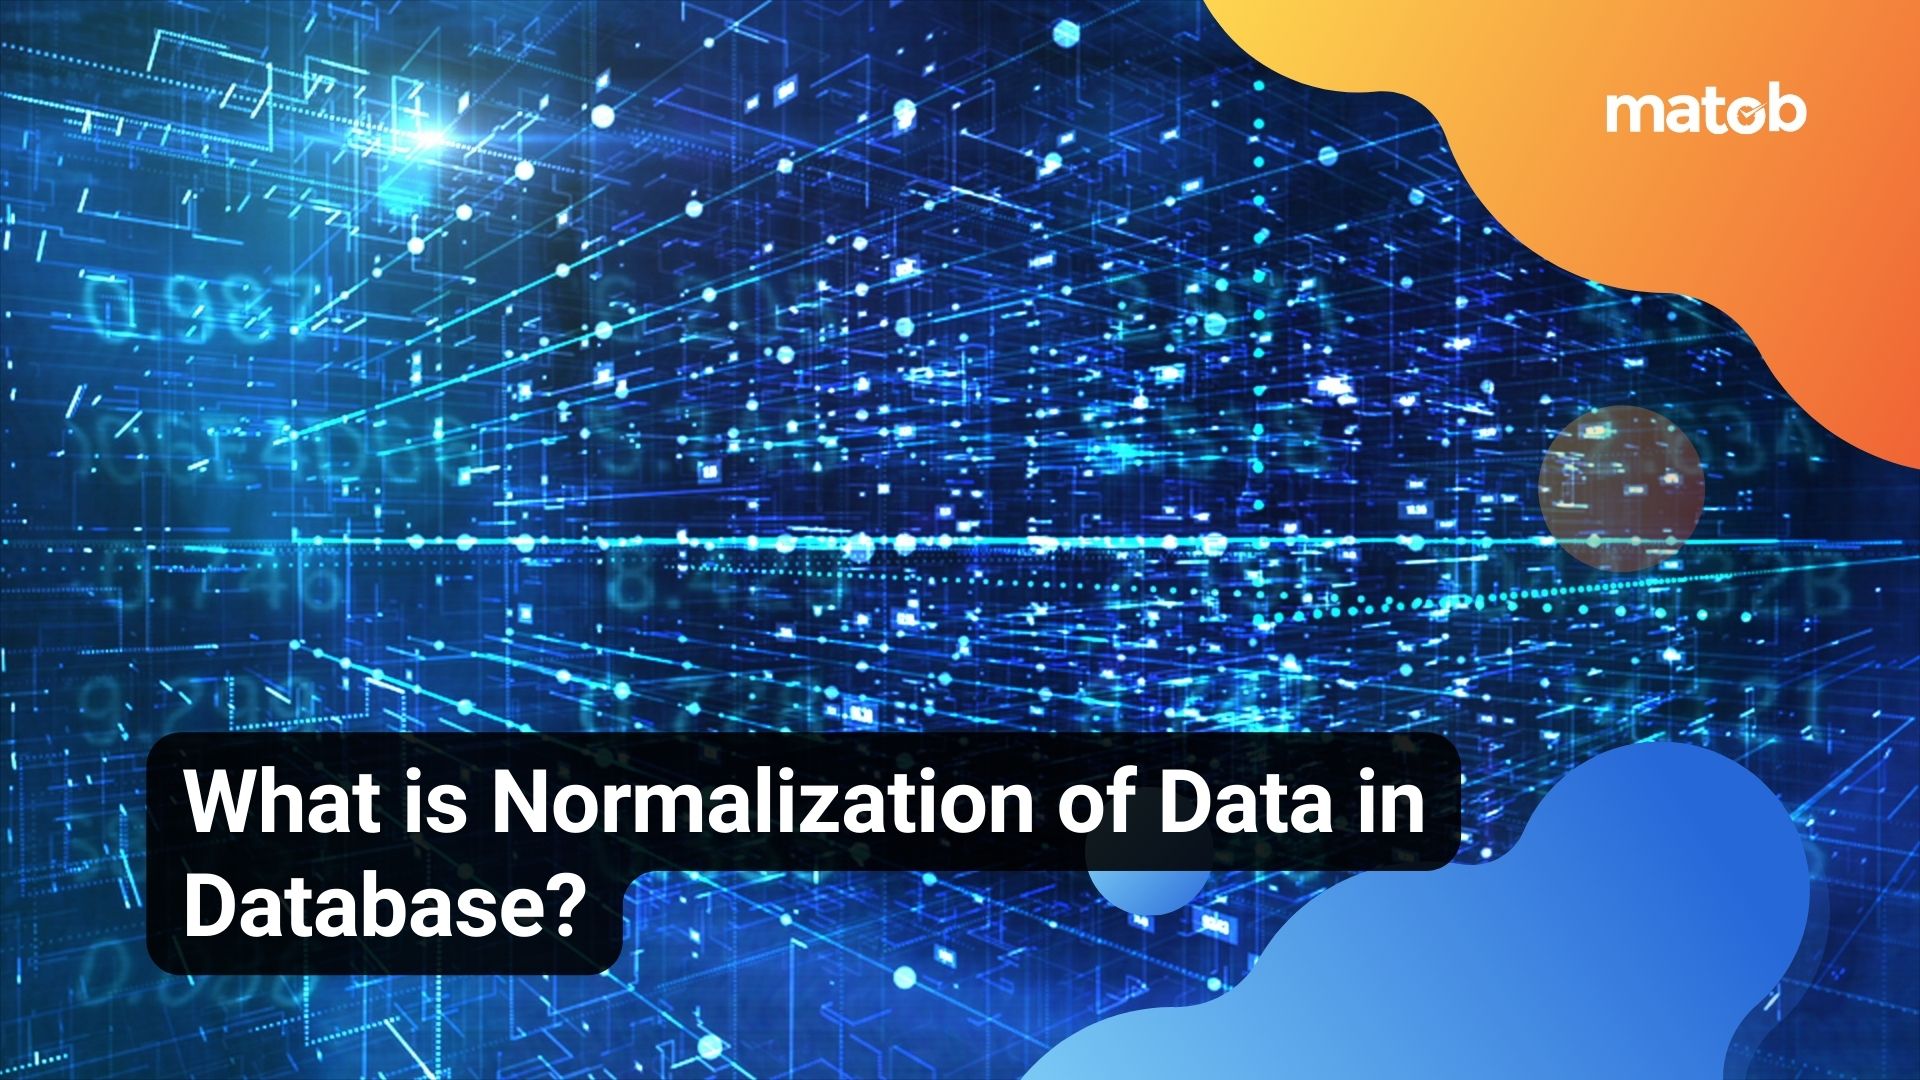 What is Normalization of Data in Database?